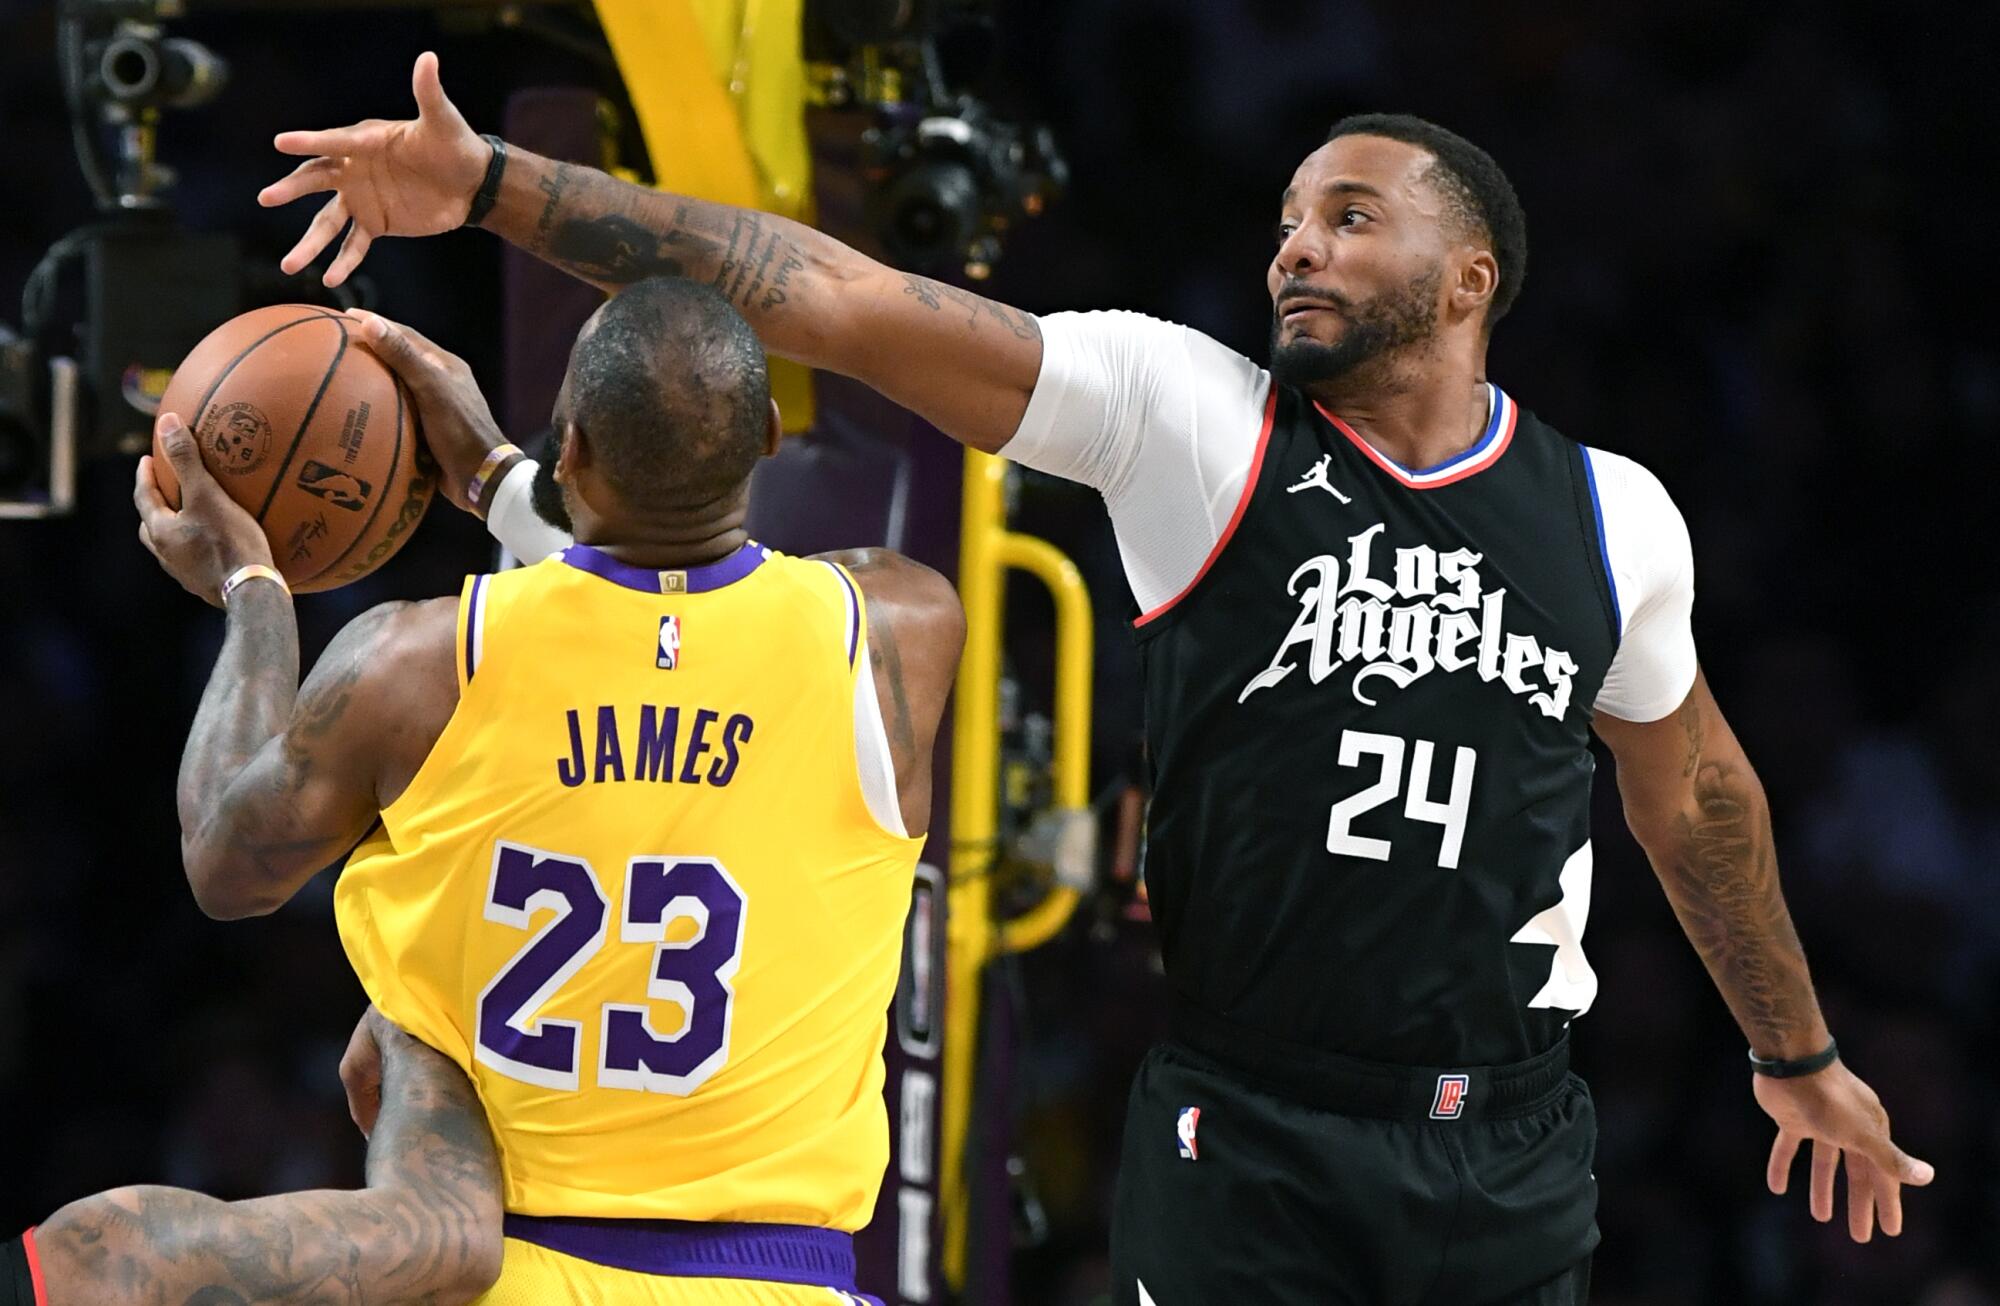 Clippers guard Norman Powell tries to block a layup by Lakers forward LeBron James.